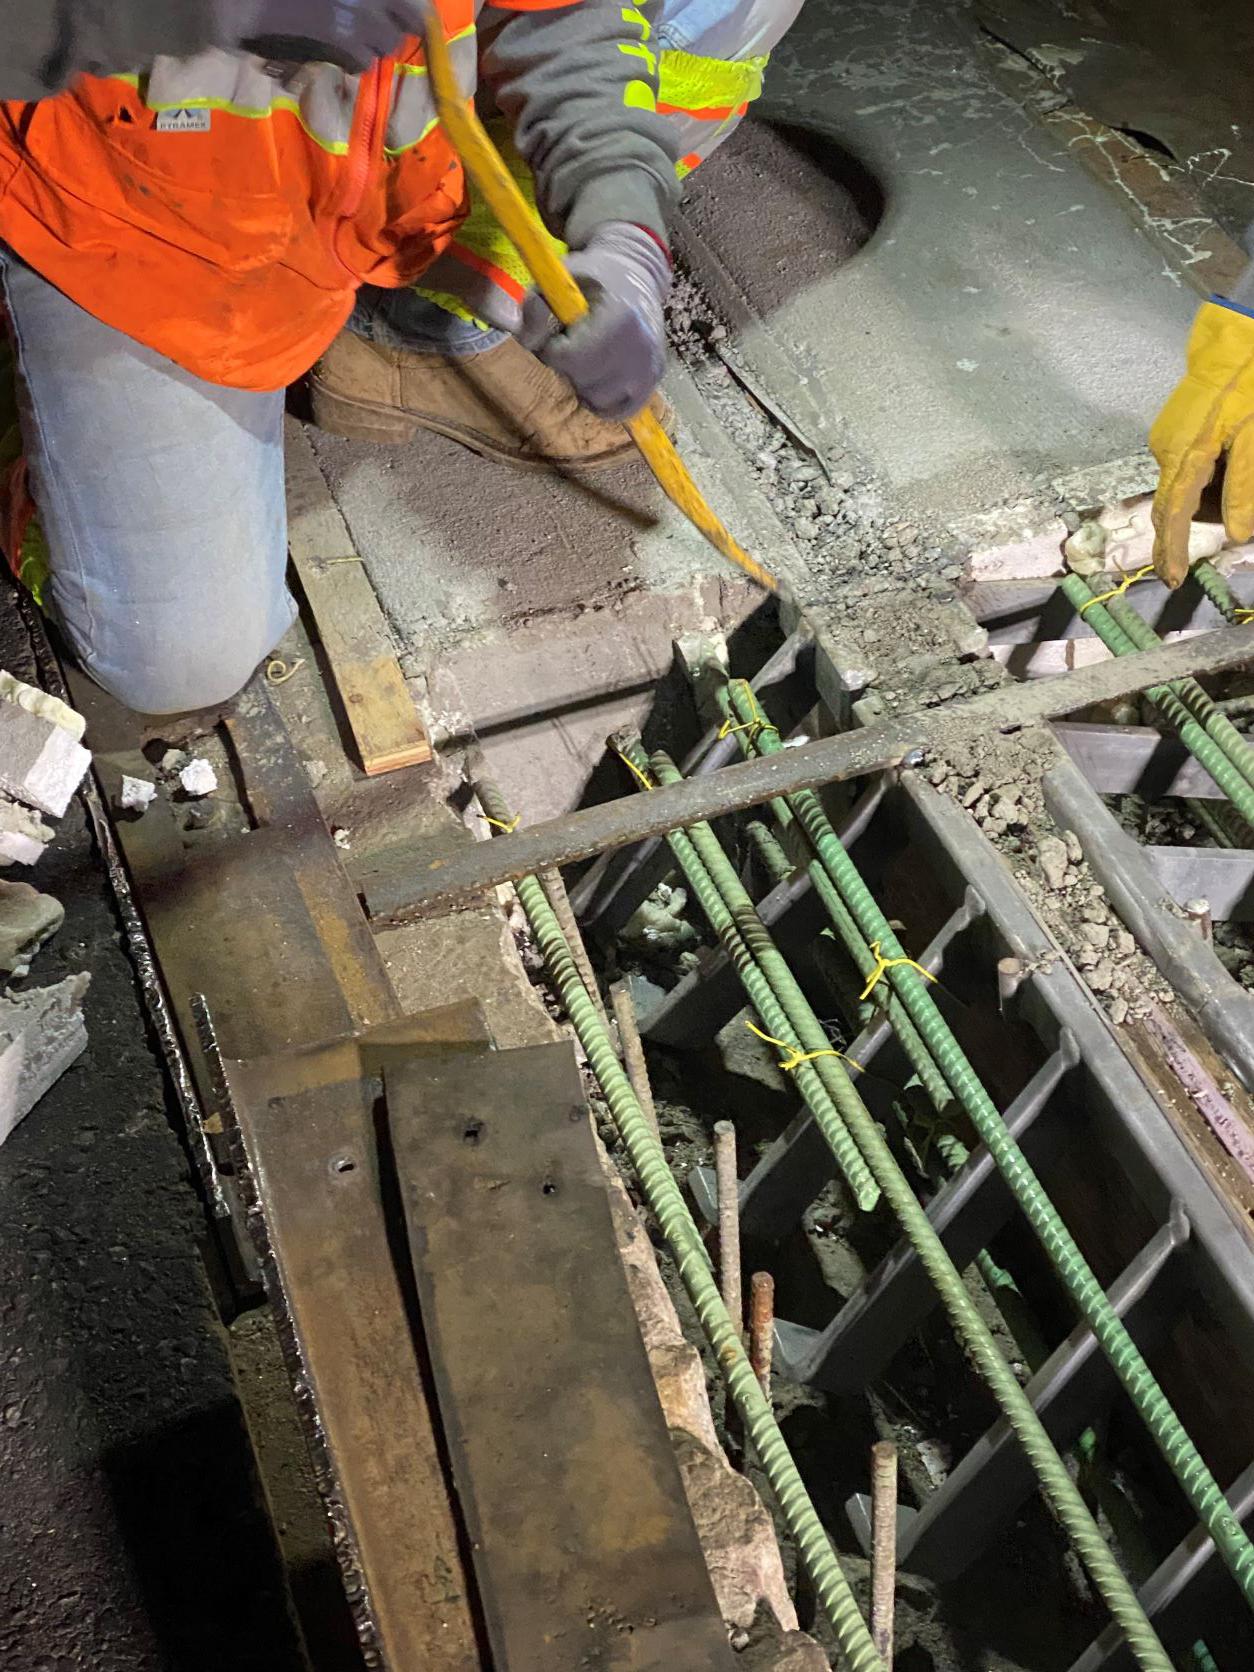 Crews replacing expansion joints on the CO 157 bridge in Boulder. Photo Chris Kelly detail image